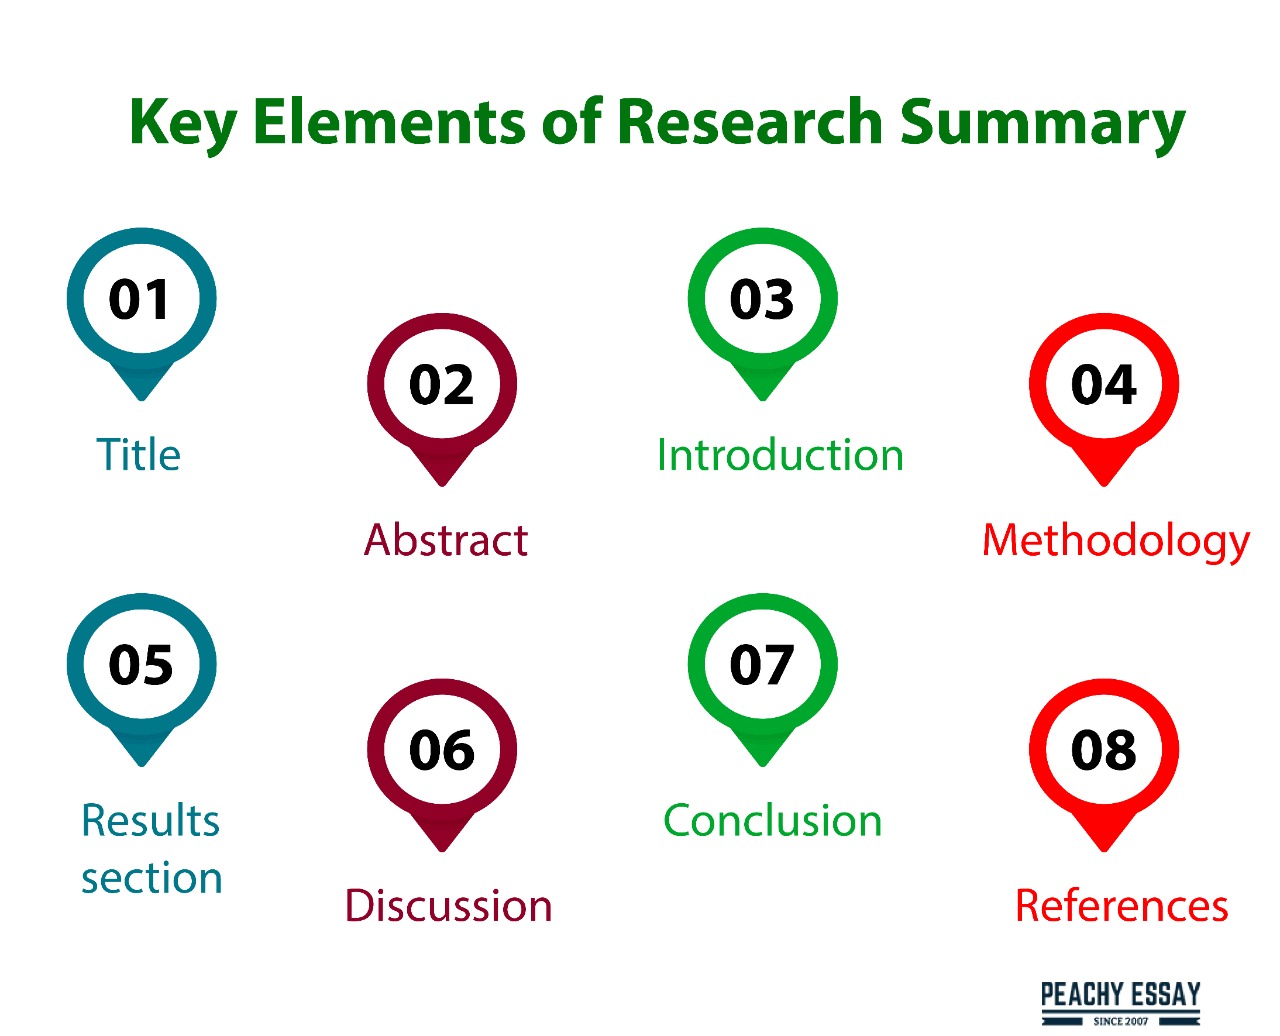 Structure of the Research Summary